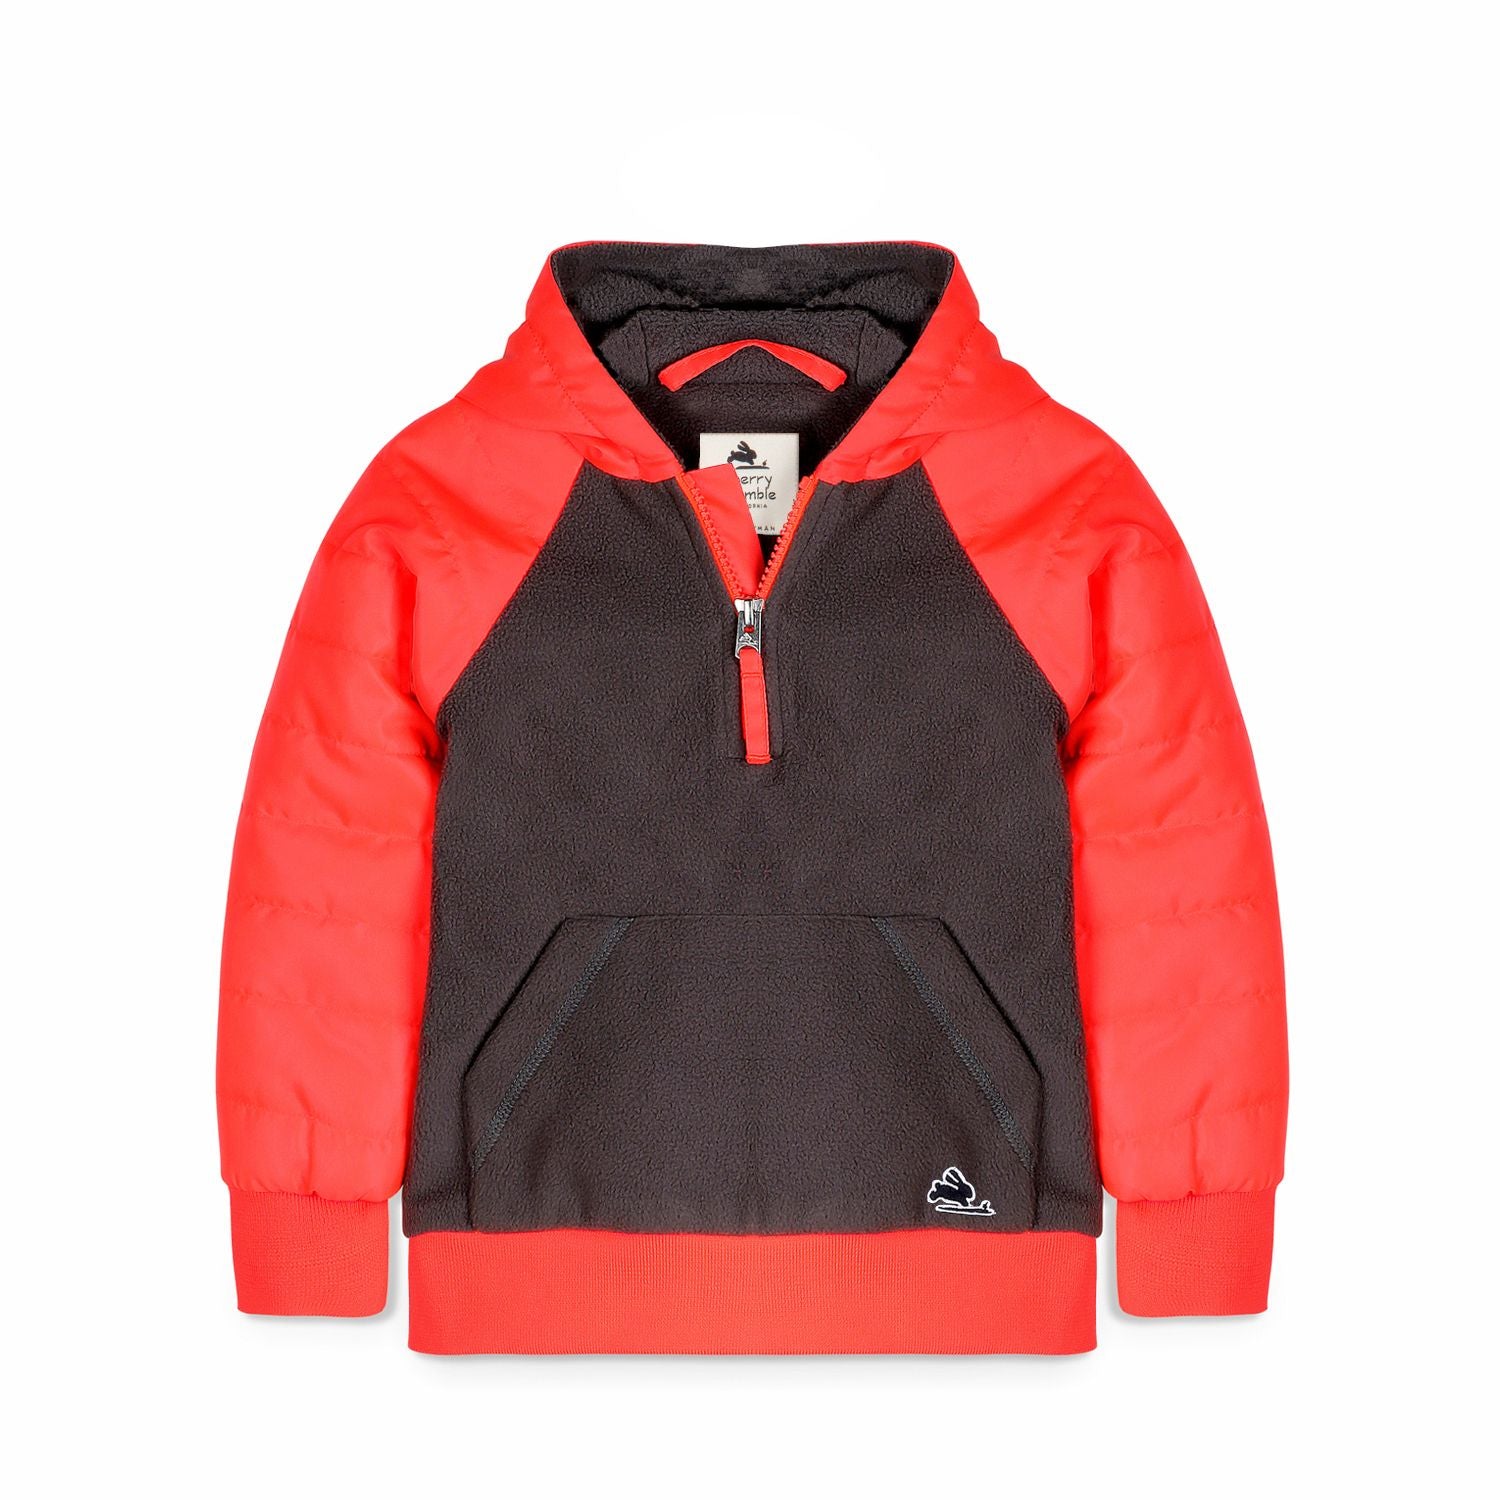 Colorblock Pull On Jacket for Boys